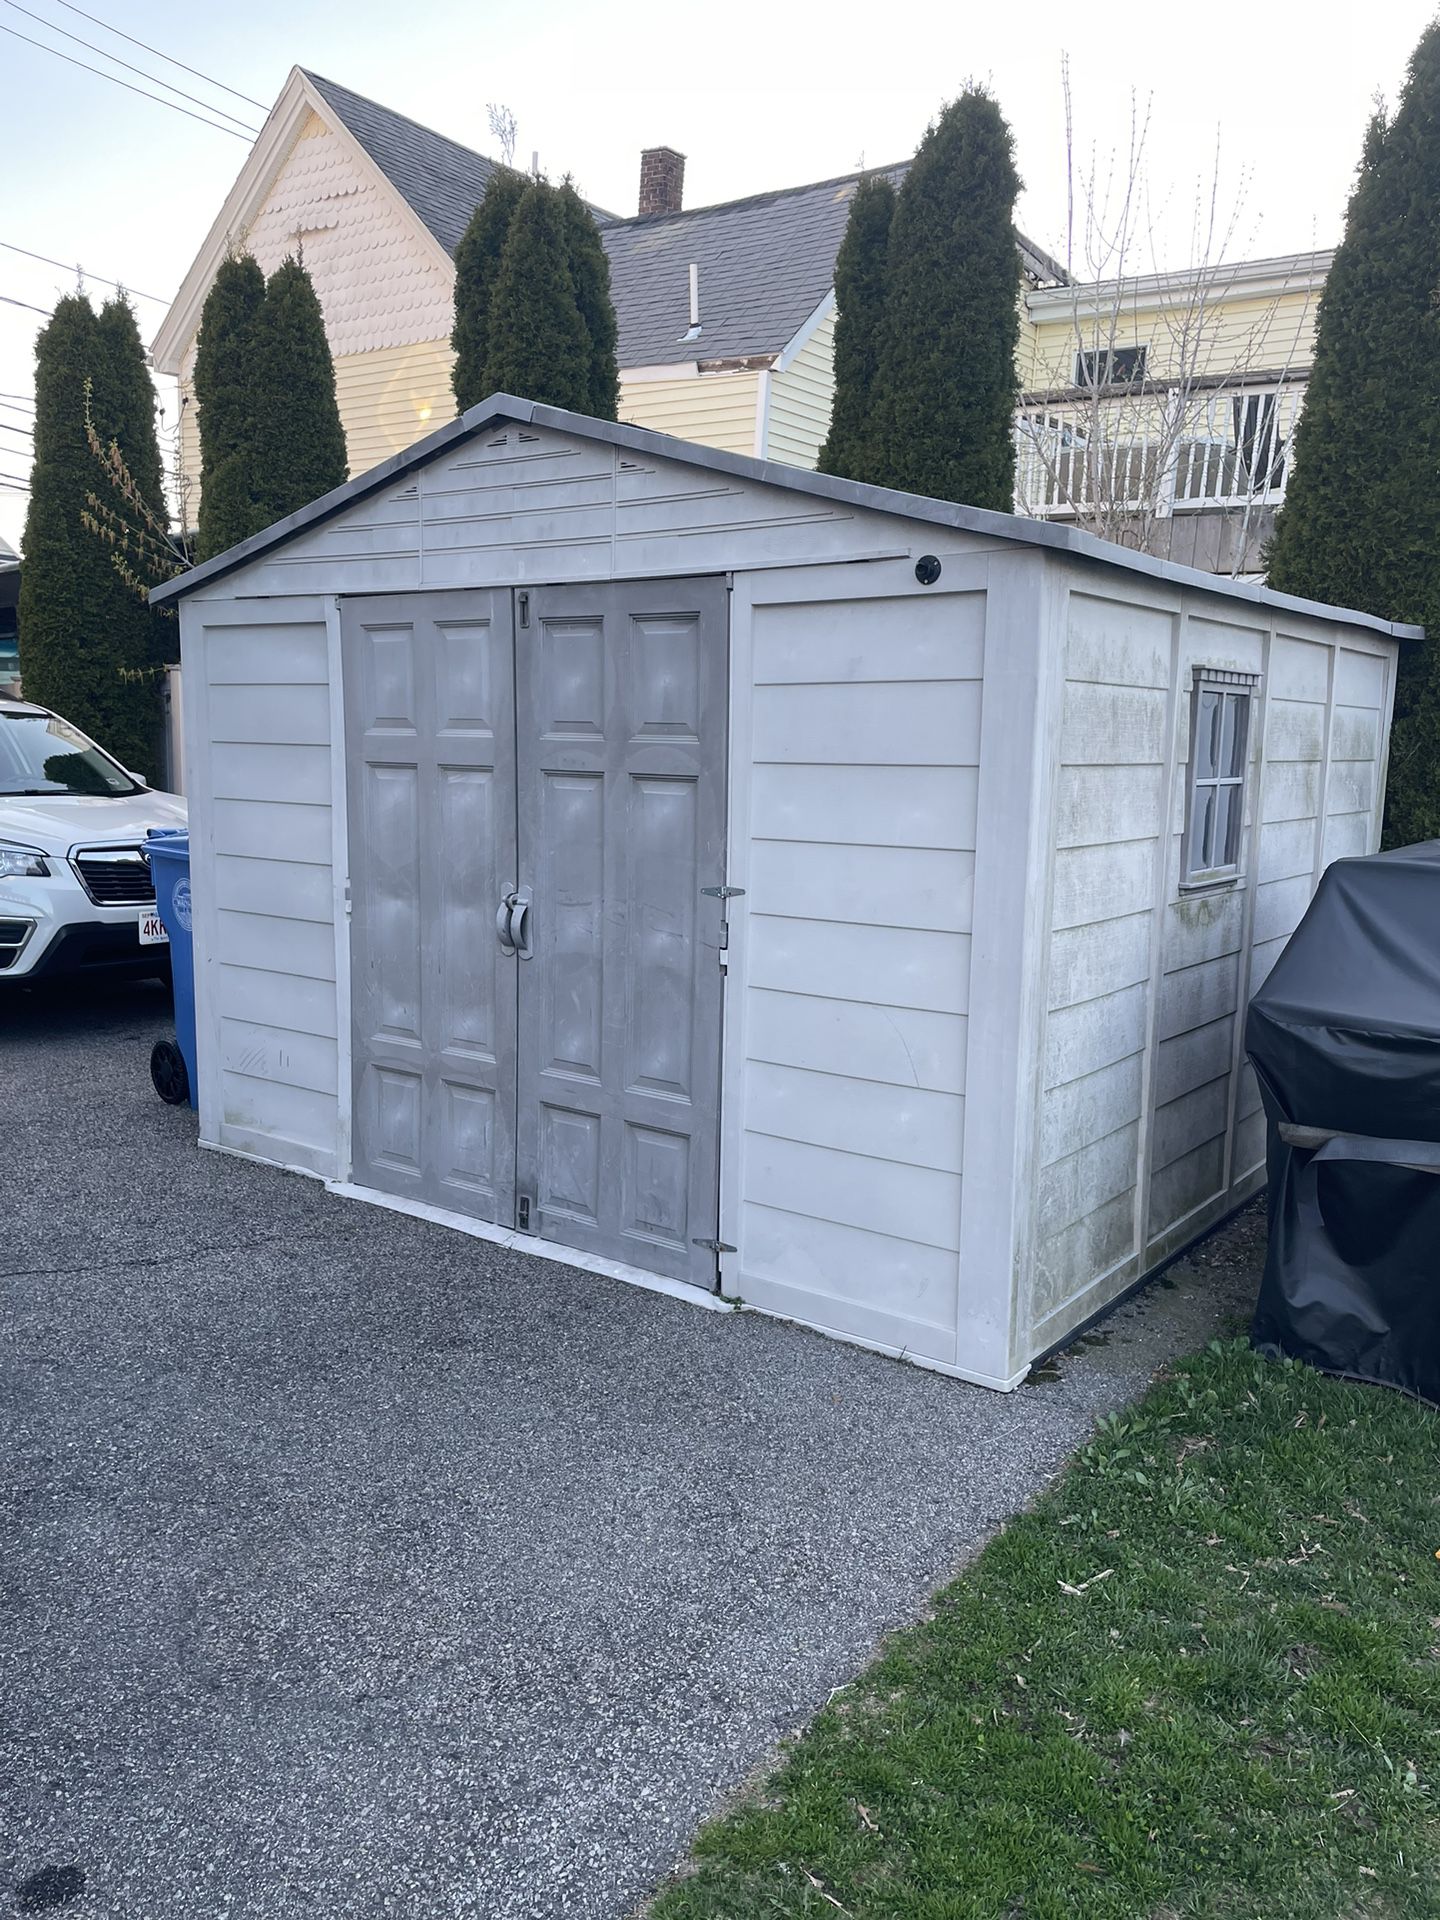 10x10 Plastic Shed for Sale - Great Condition!